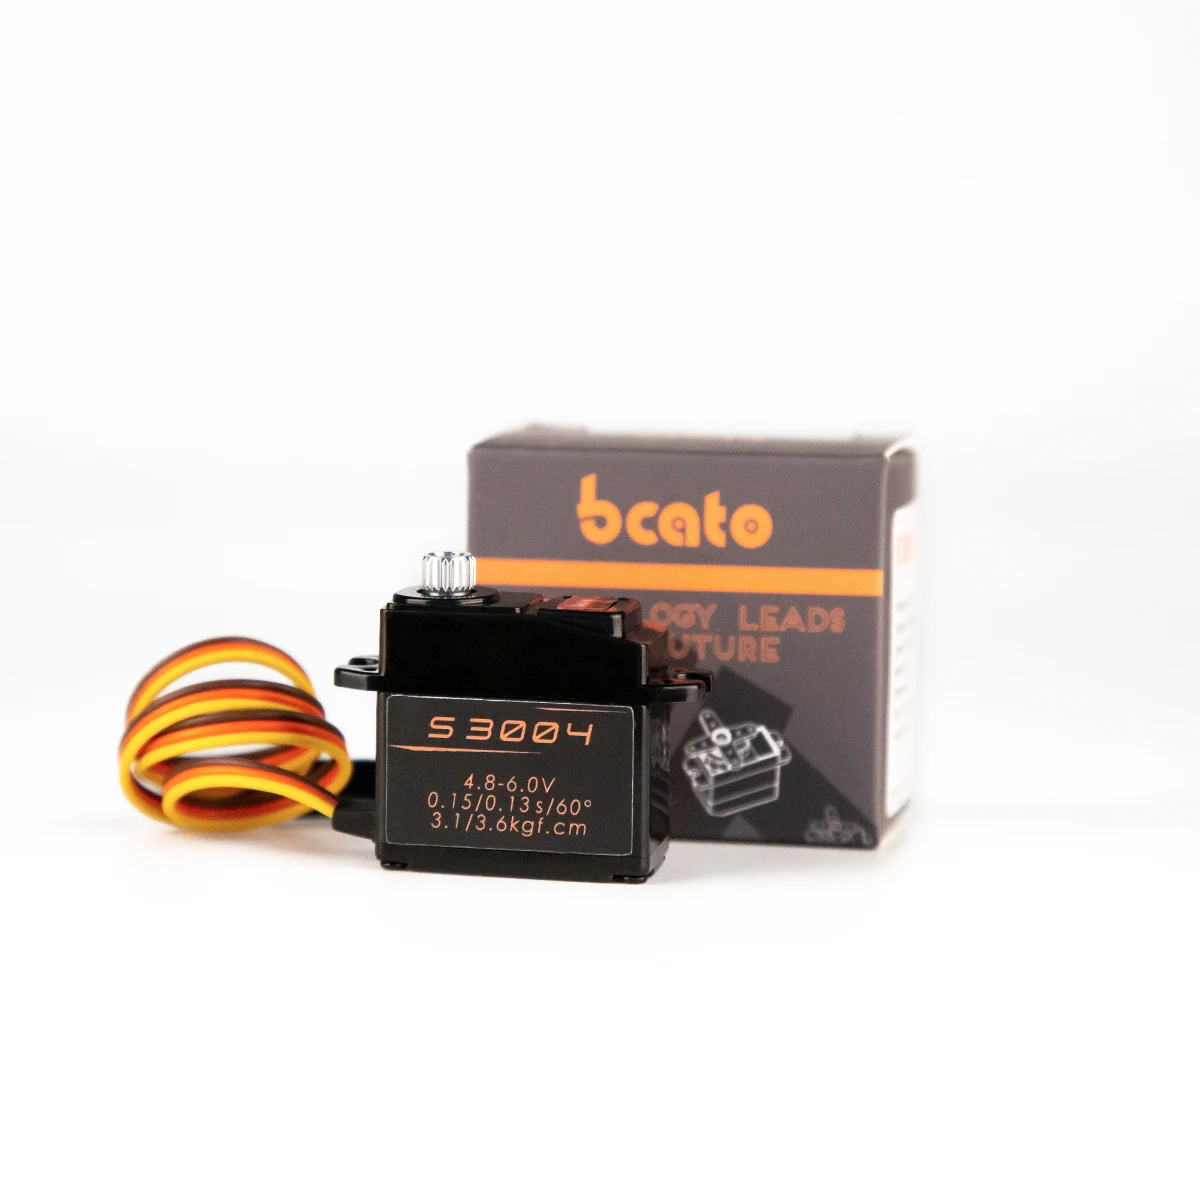 

Bcato S3004 20g Analog Servo 3.5kg 0.13sec 23T Metal Gear for Rc FPV Helicopter Airplane Tail Servo